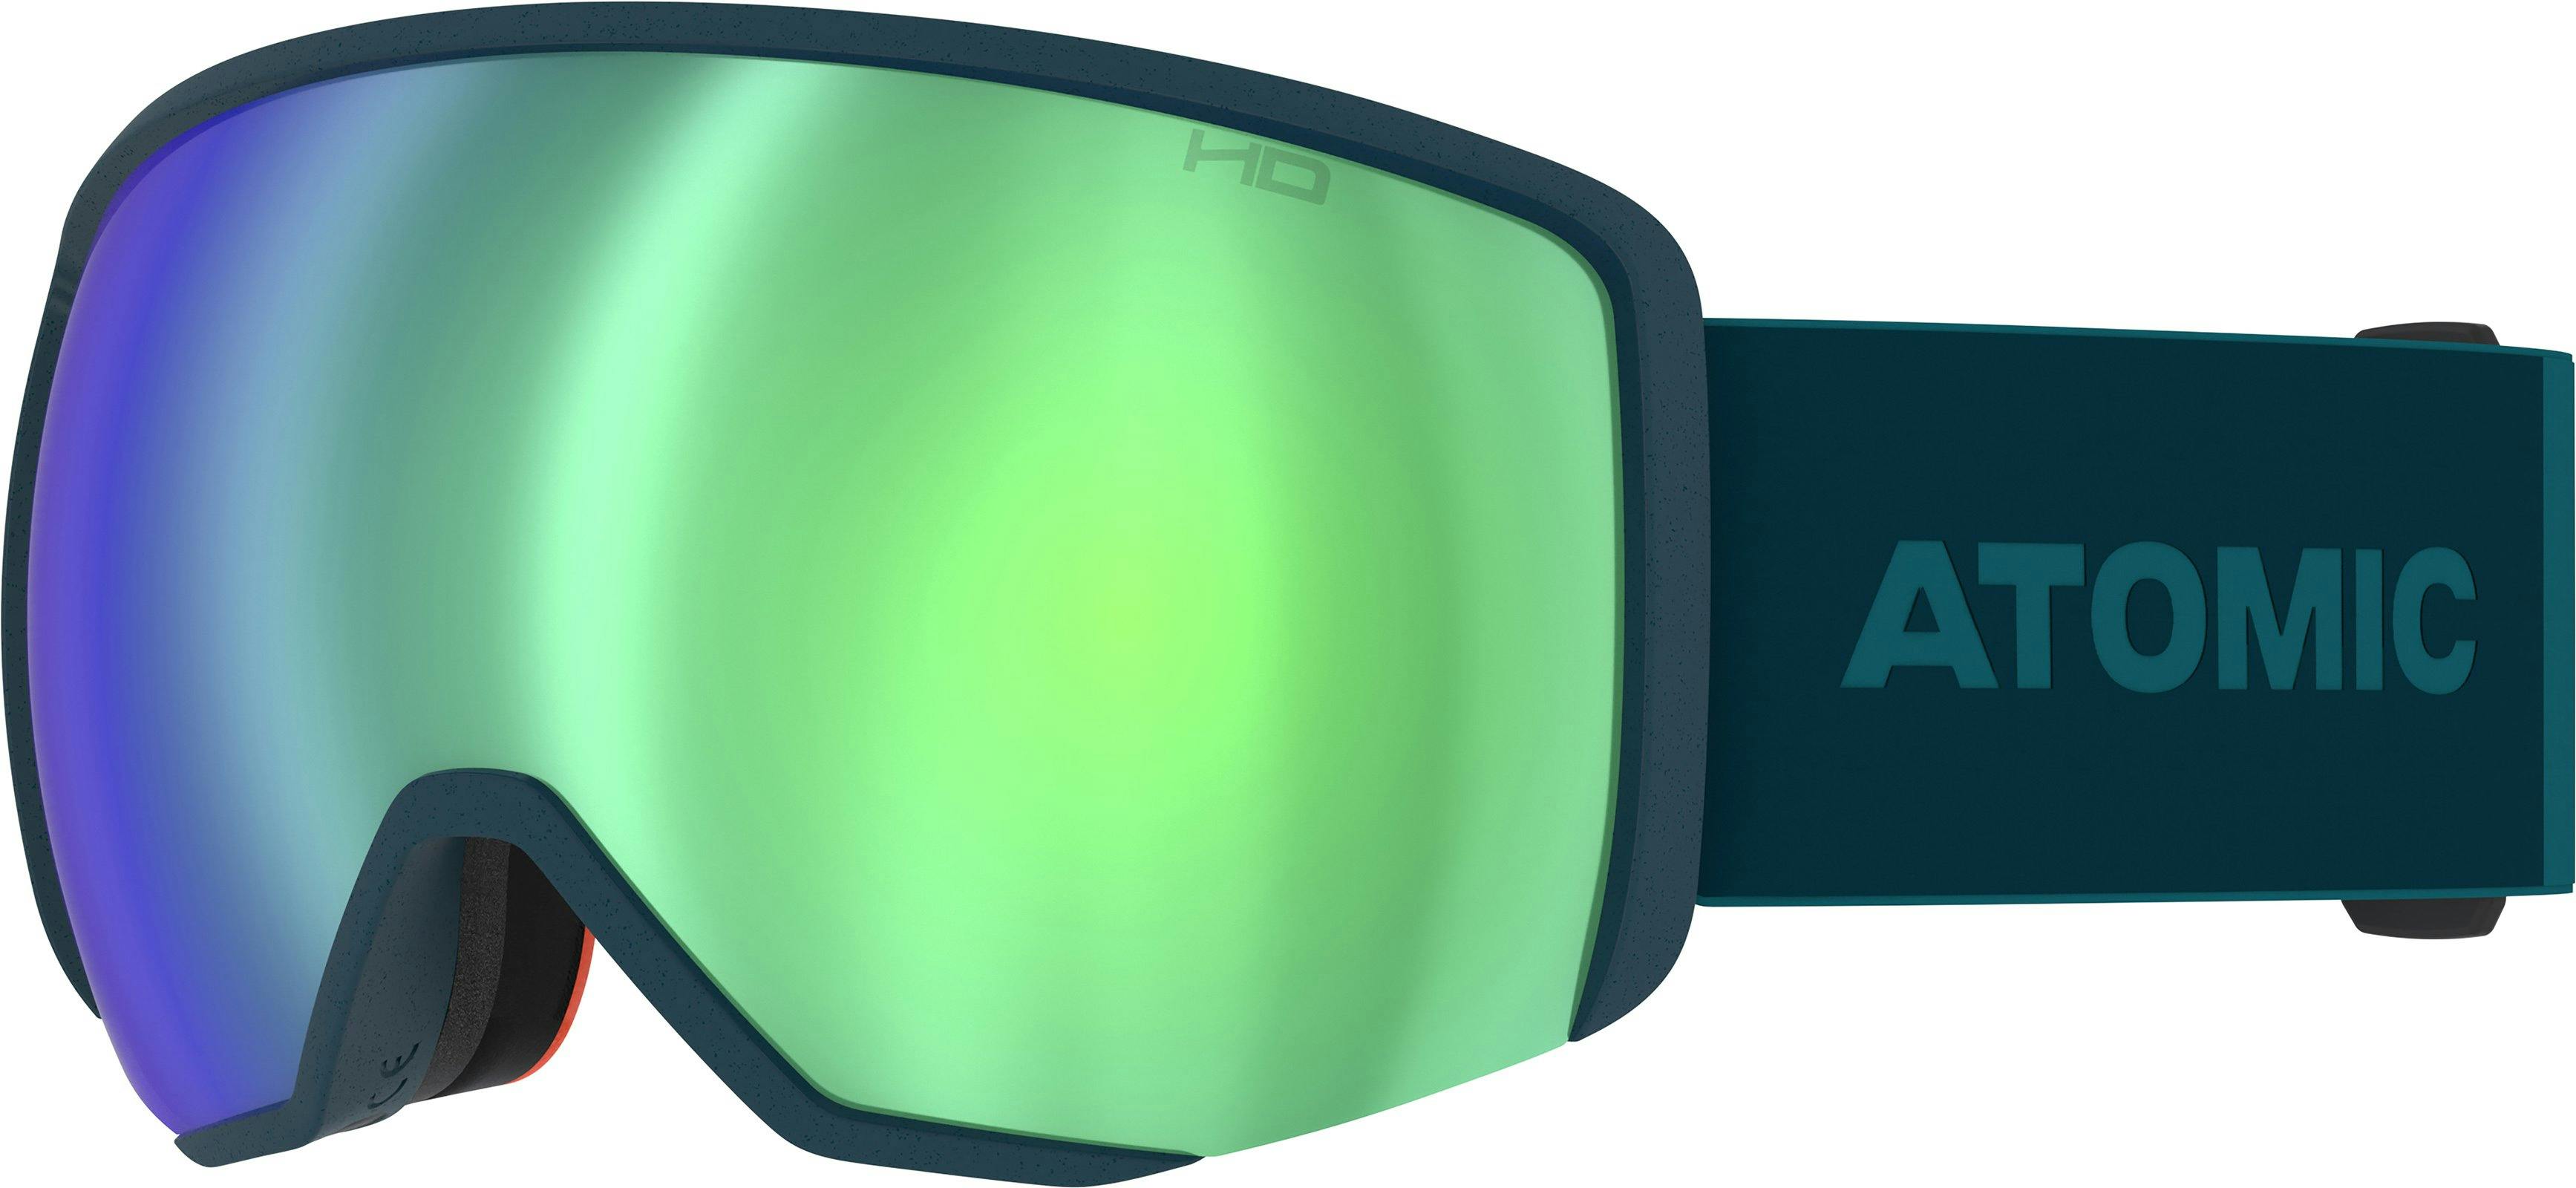 Product image for Revent L HD Goggles